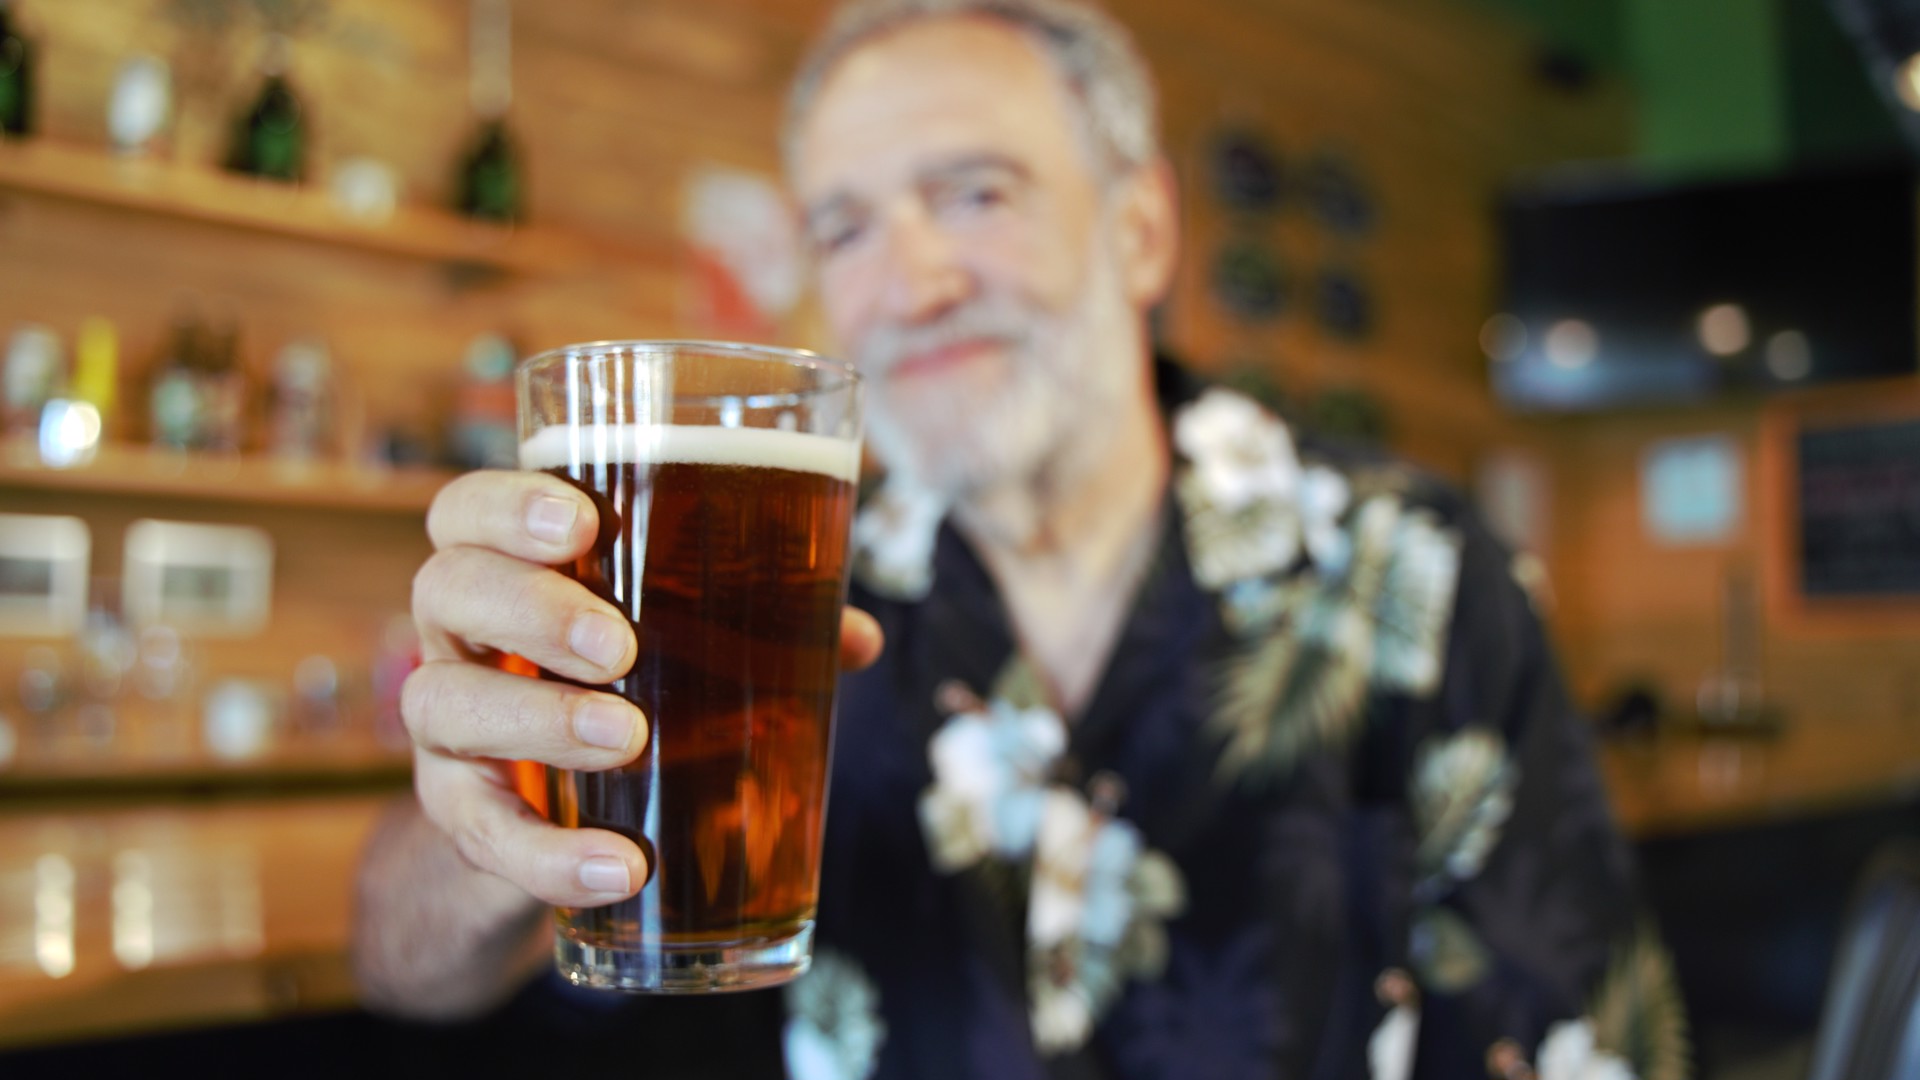 Charlie Papazian is credited with pioneering Colorado's craft beer industry. He created the Great American Beer Festival.